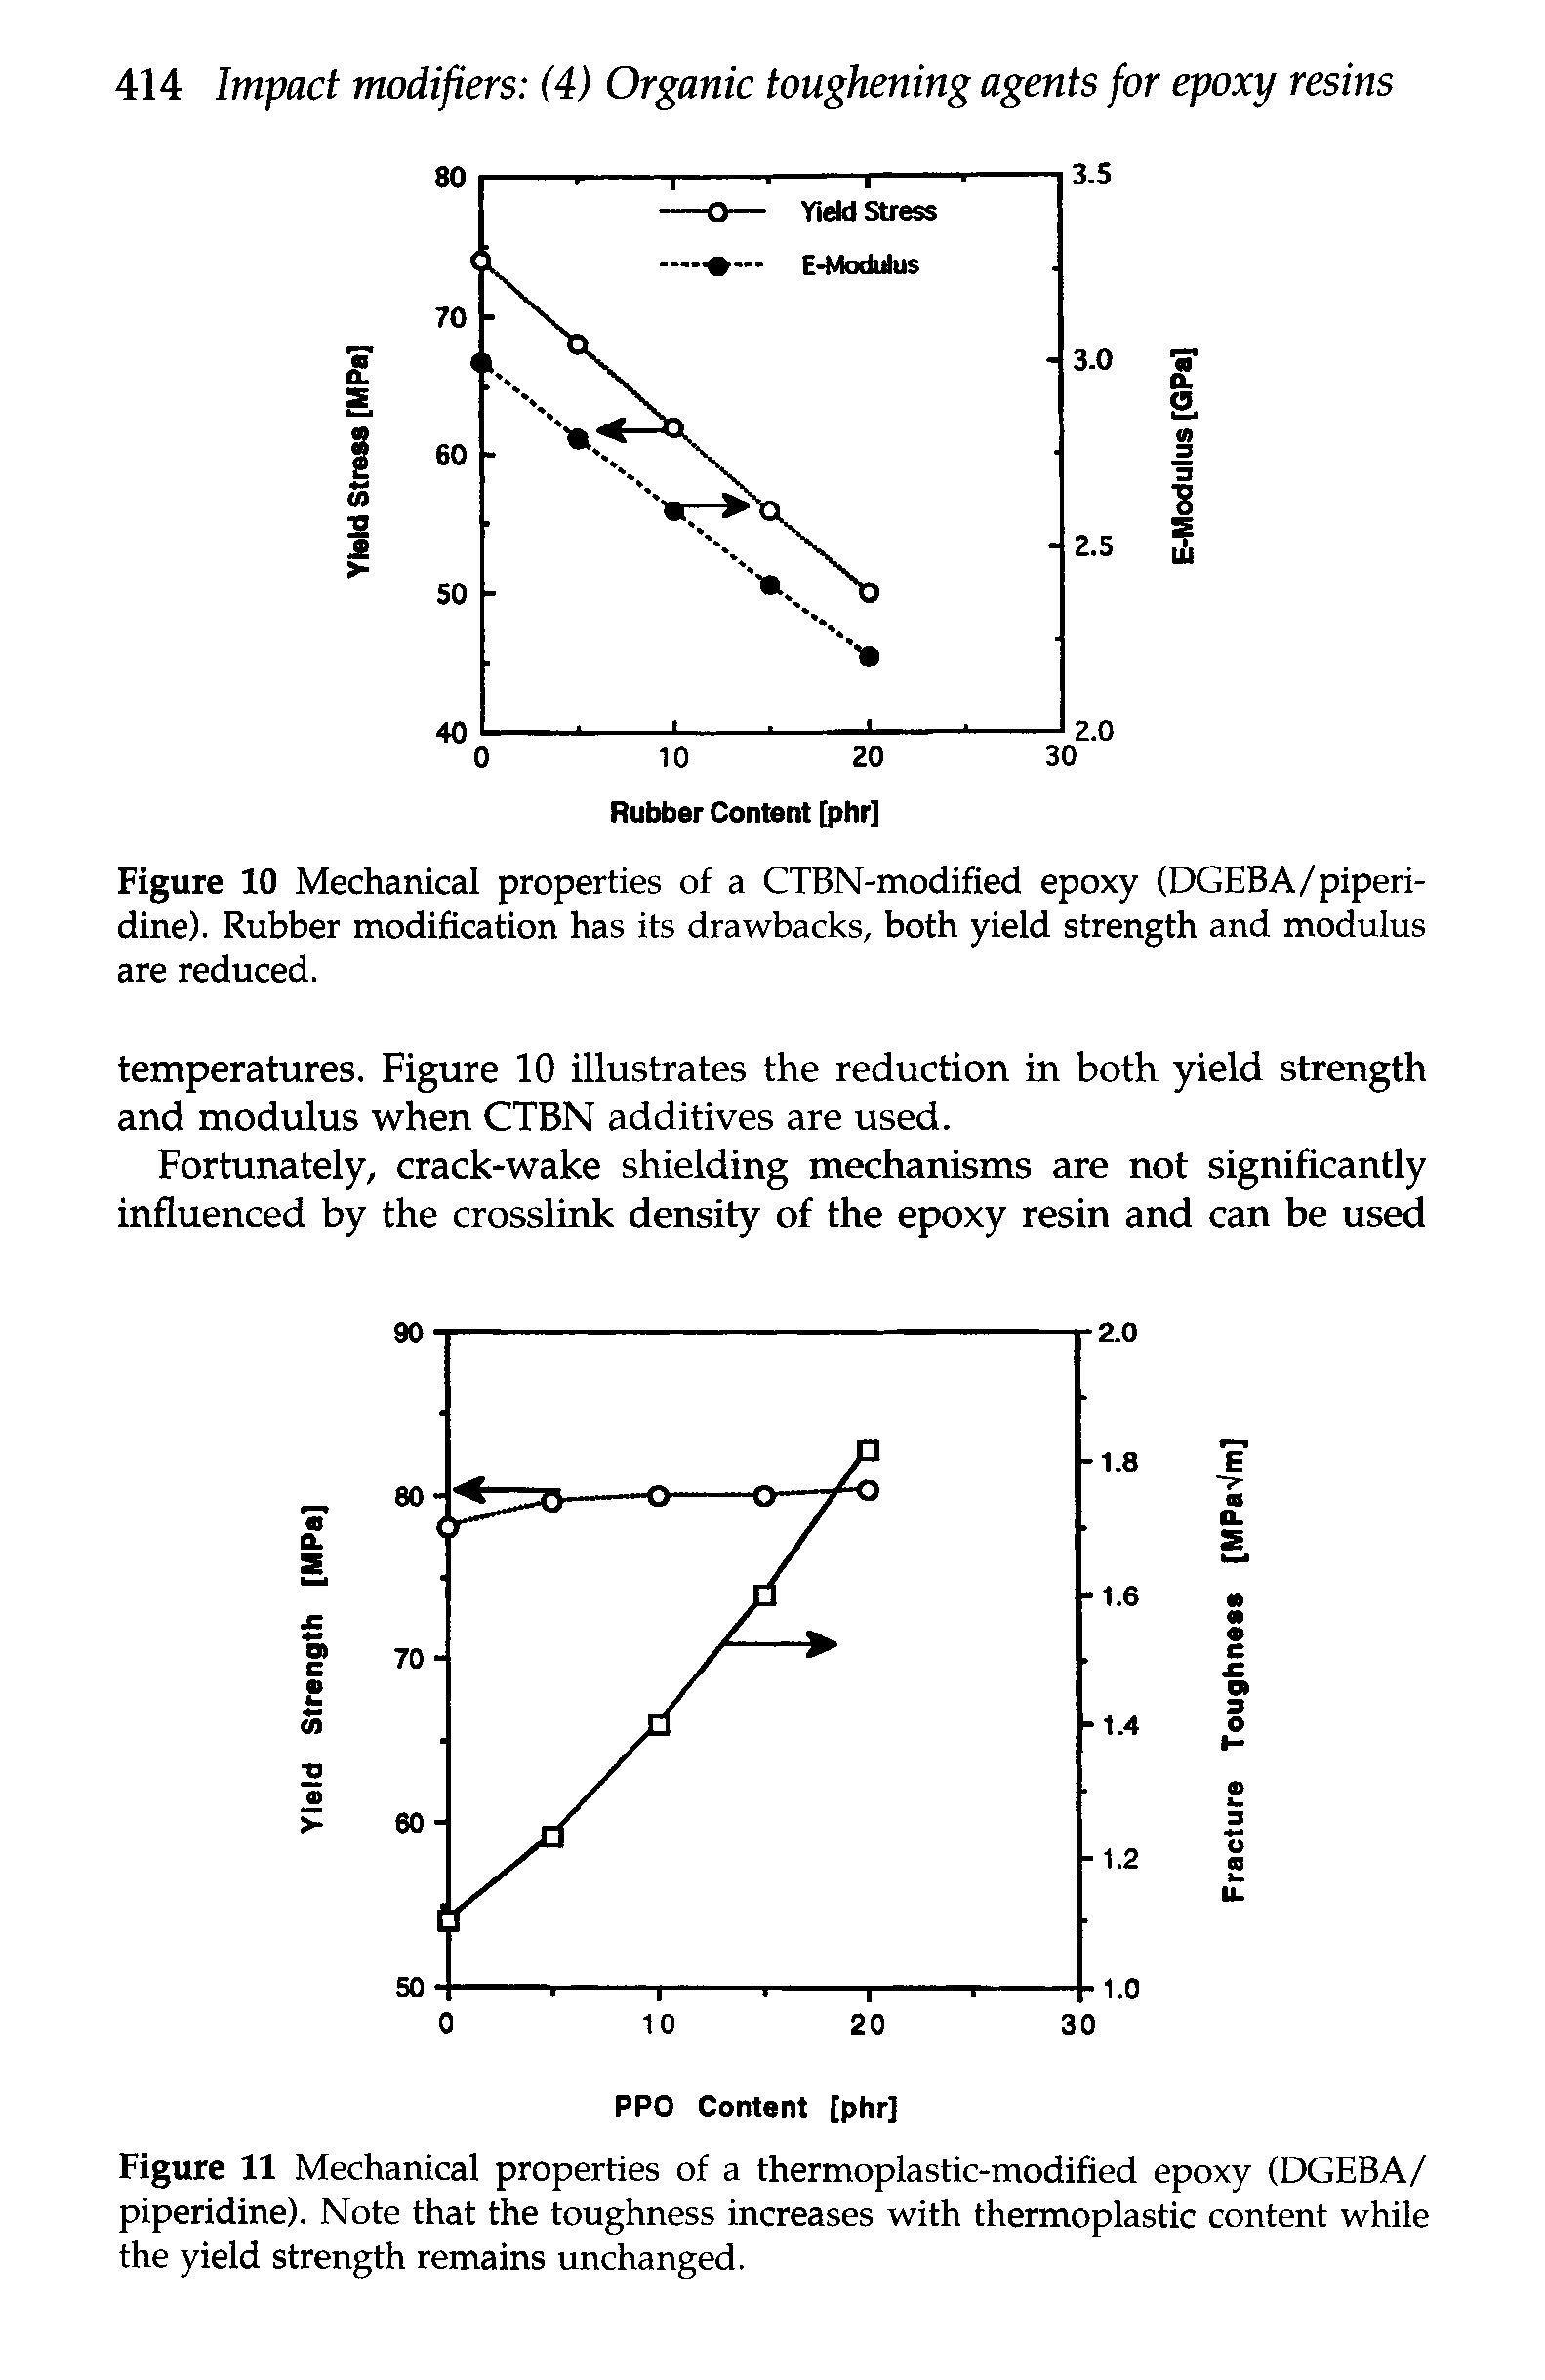 Figure 11 Mechanical properties of a thermoplastic-modified epoxy (DGEBA/ piperidine). Note that the toughness increases with thermoplastic content while the yield strength remains unchanged.